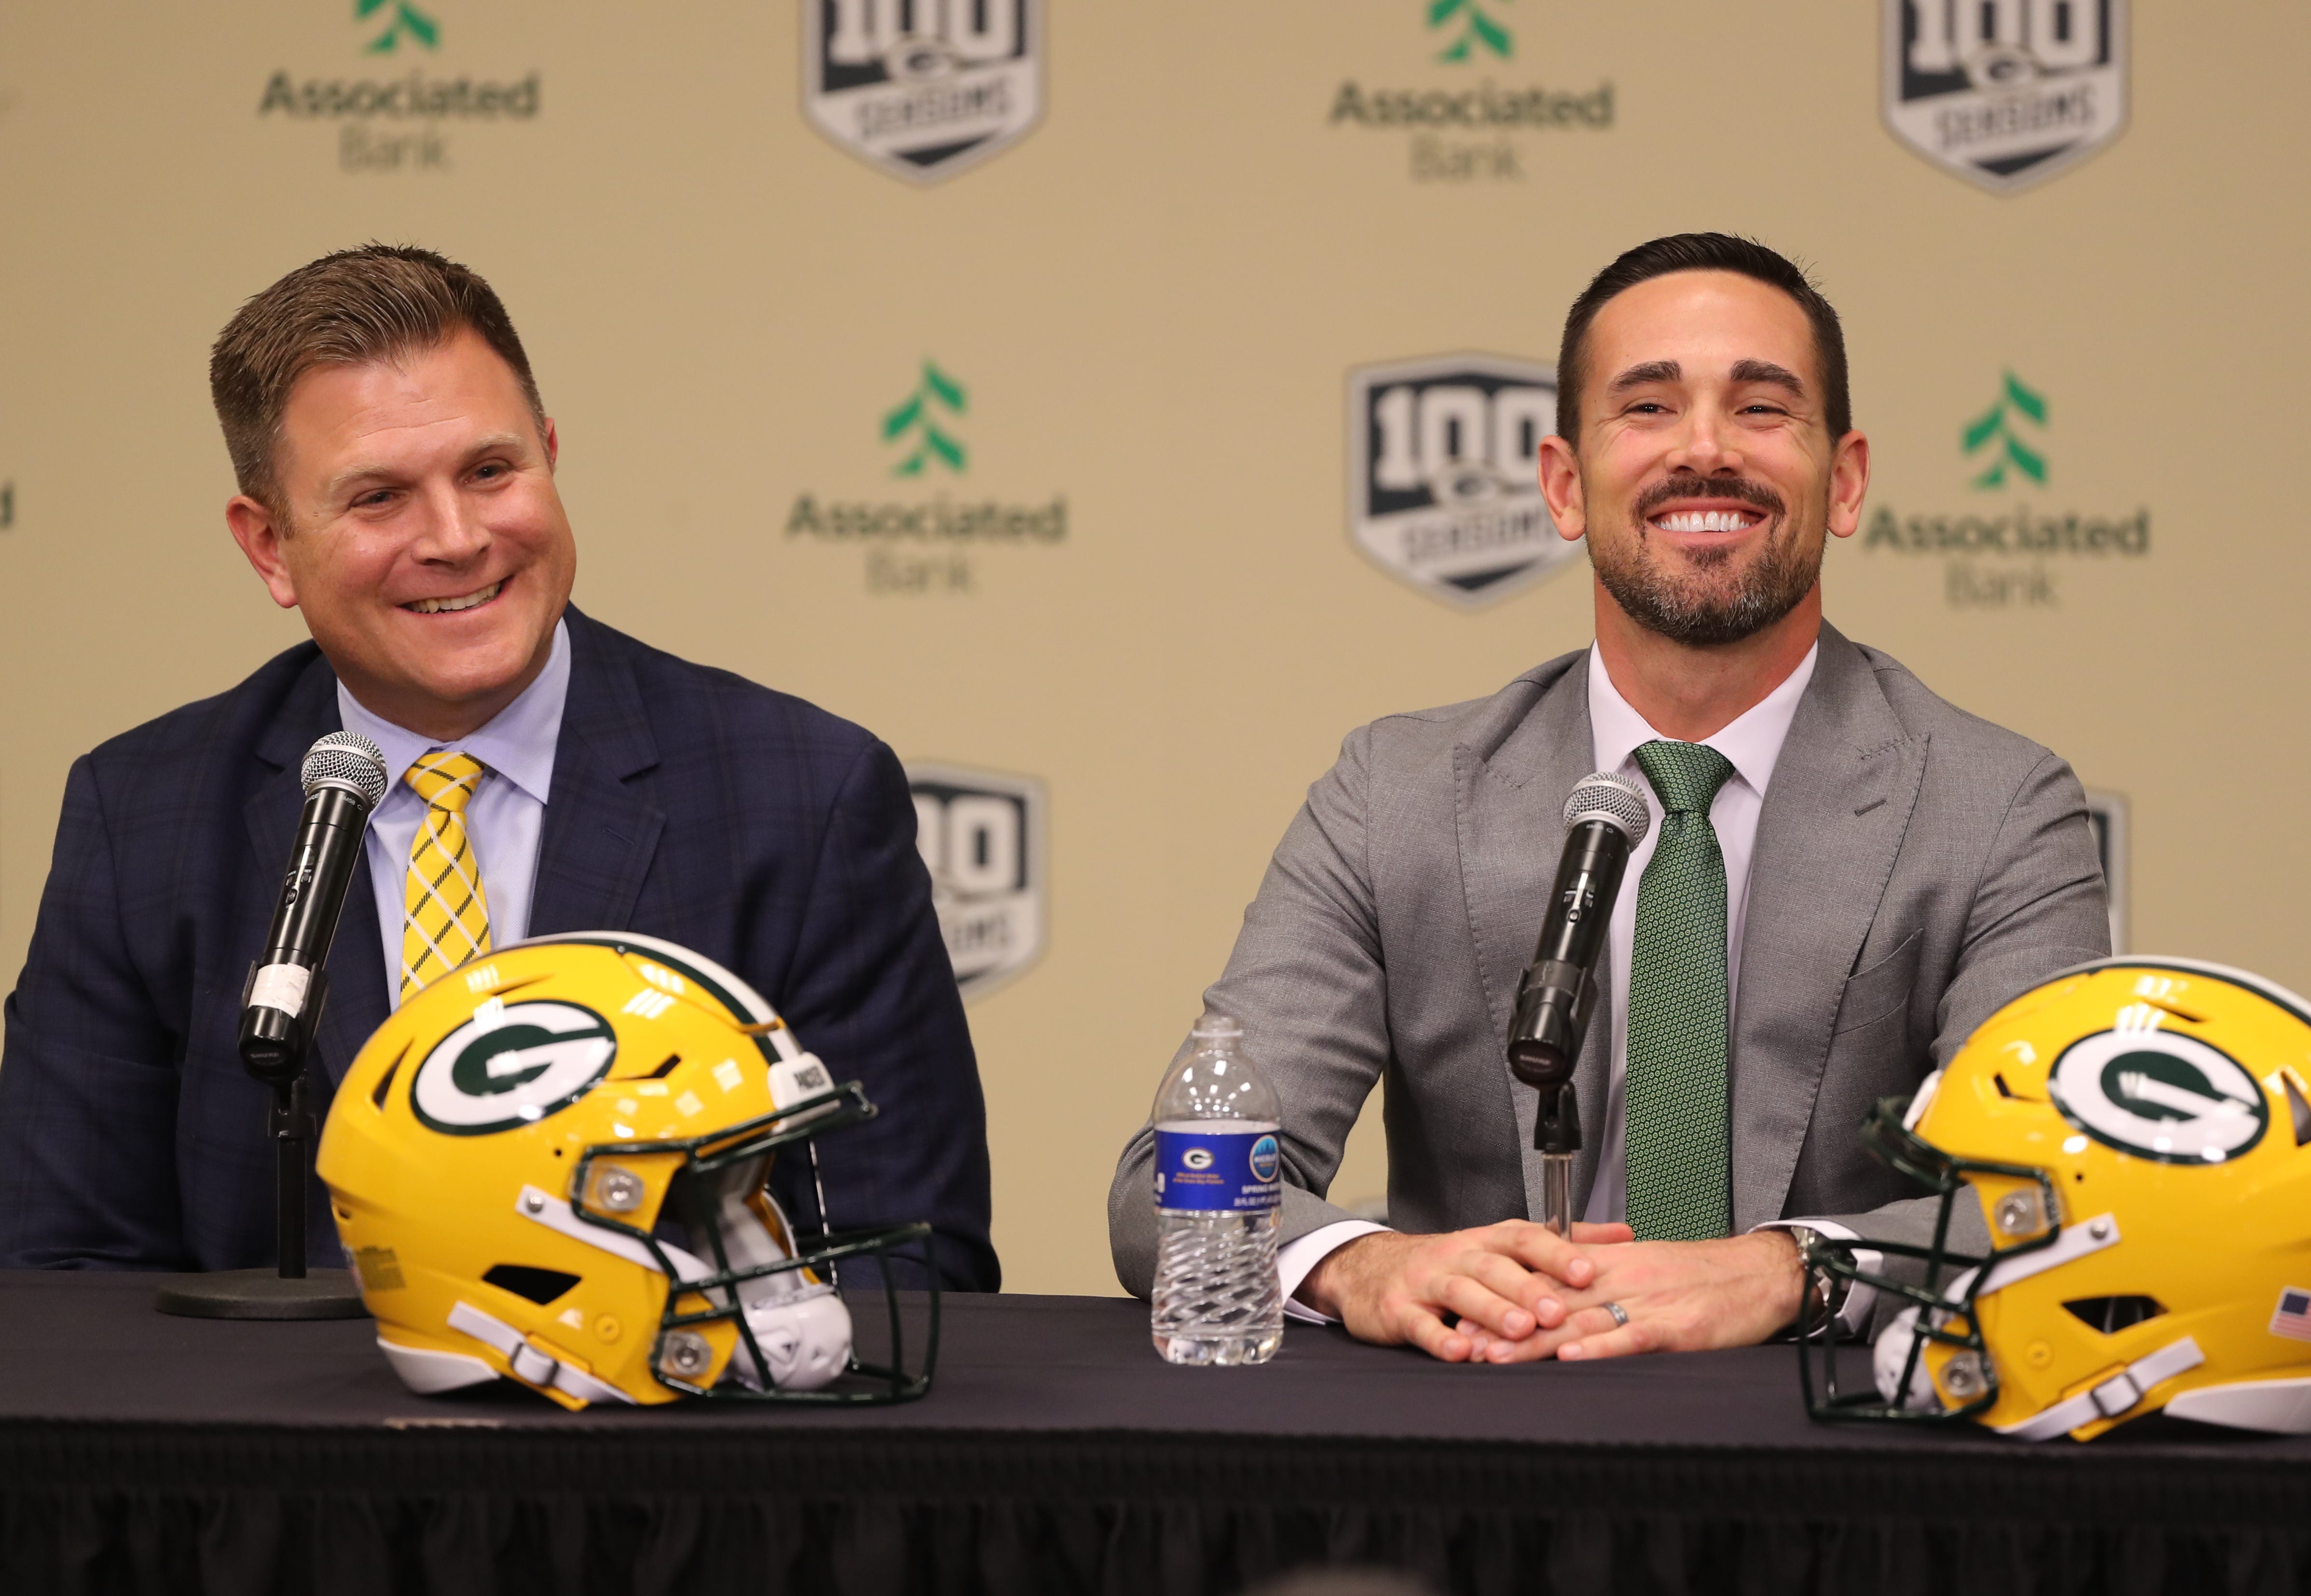 New Green Bay Packers head coach Matt LaFleur, right, laughs with general manager Brian Gutekunst as LaFleur is introduced during a press conference in the Lambeau Field media auditorium Wednesday, January 9, 2019 in Green Bay, Wis.